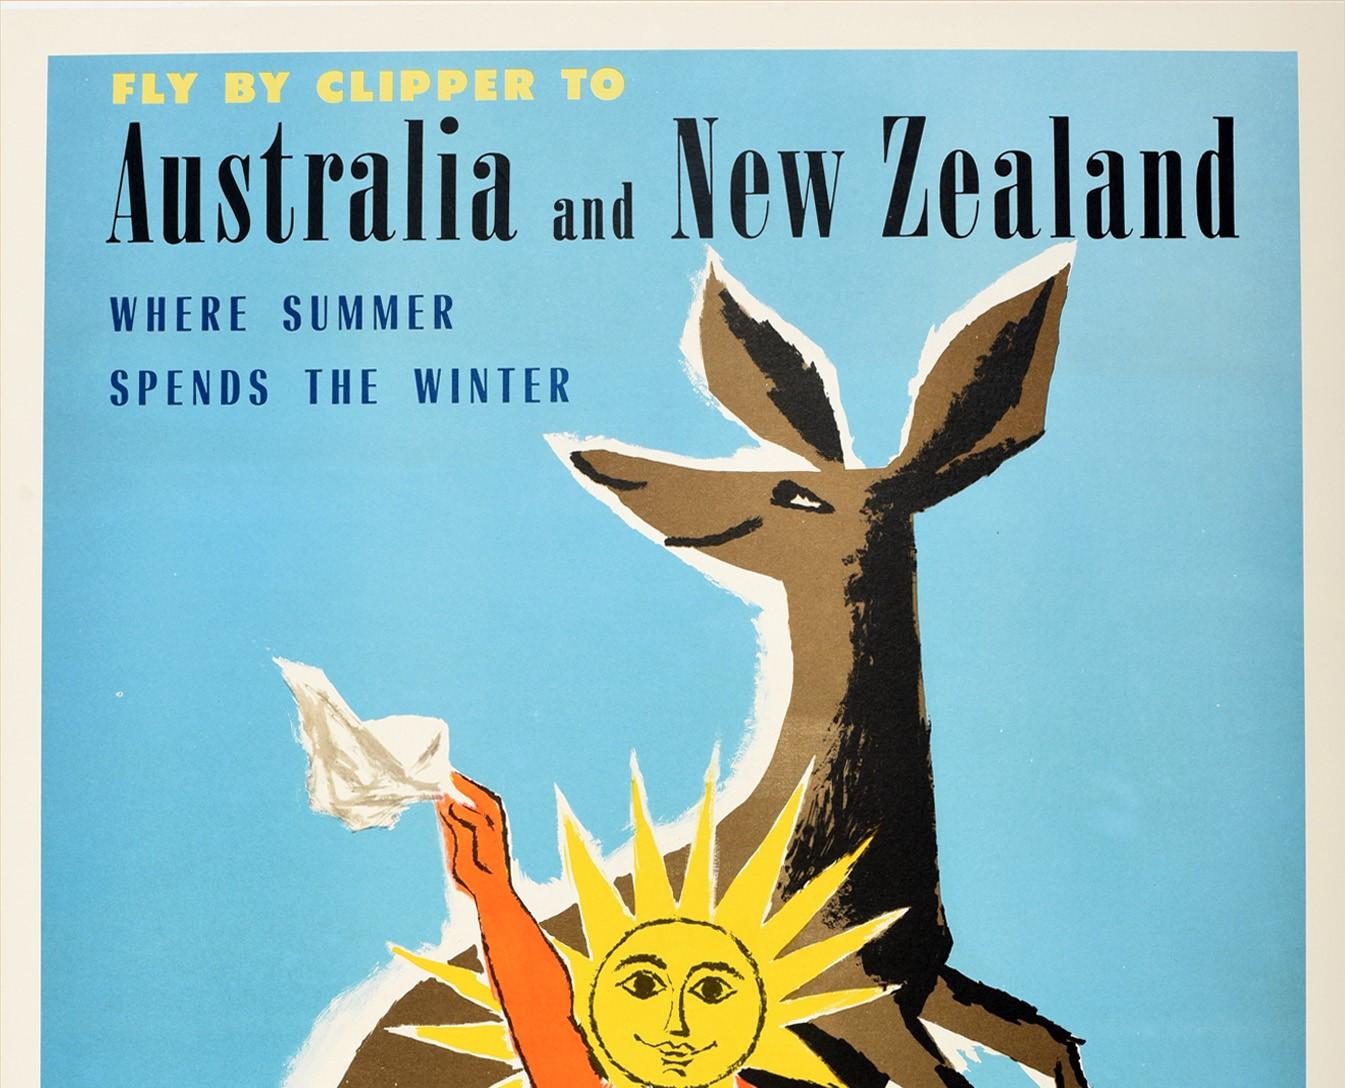 Original vintage travel poster - Fly By Clipper To Australia and New Zealand Where Summer Spends The Winter Pan American World Airways The World's Most Experienced Airline - featuring a fun and colourful design by Jean Carlu (1900-1997) and Fred